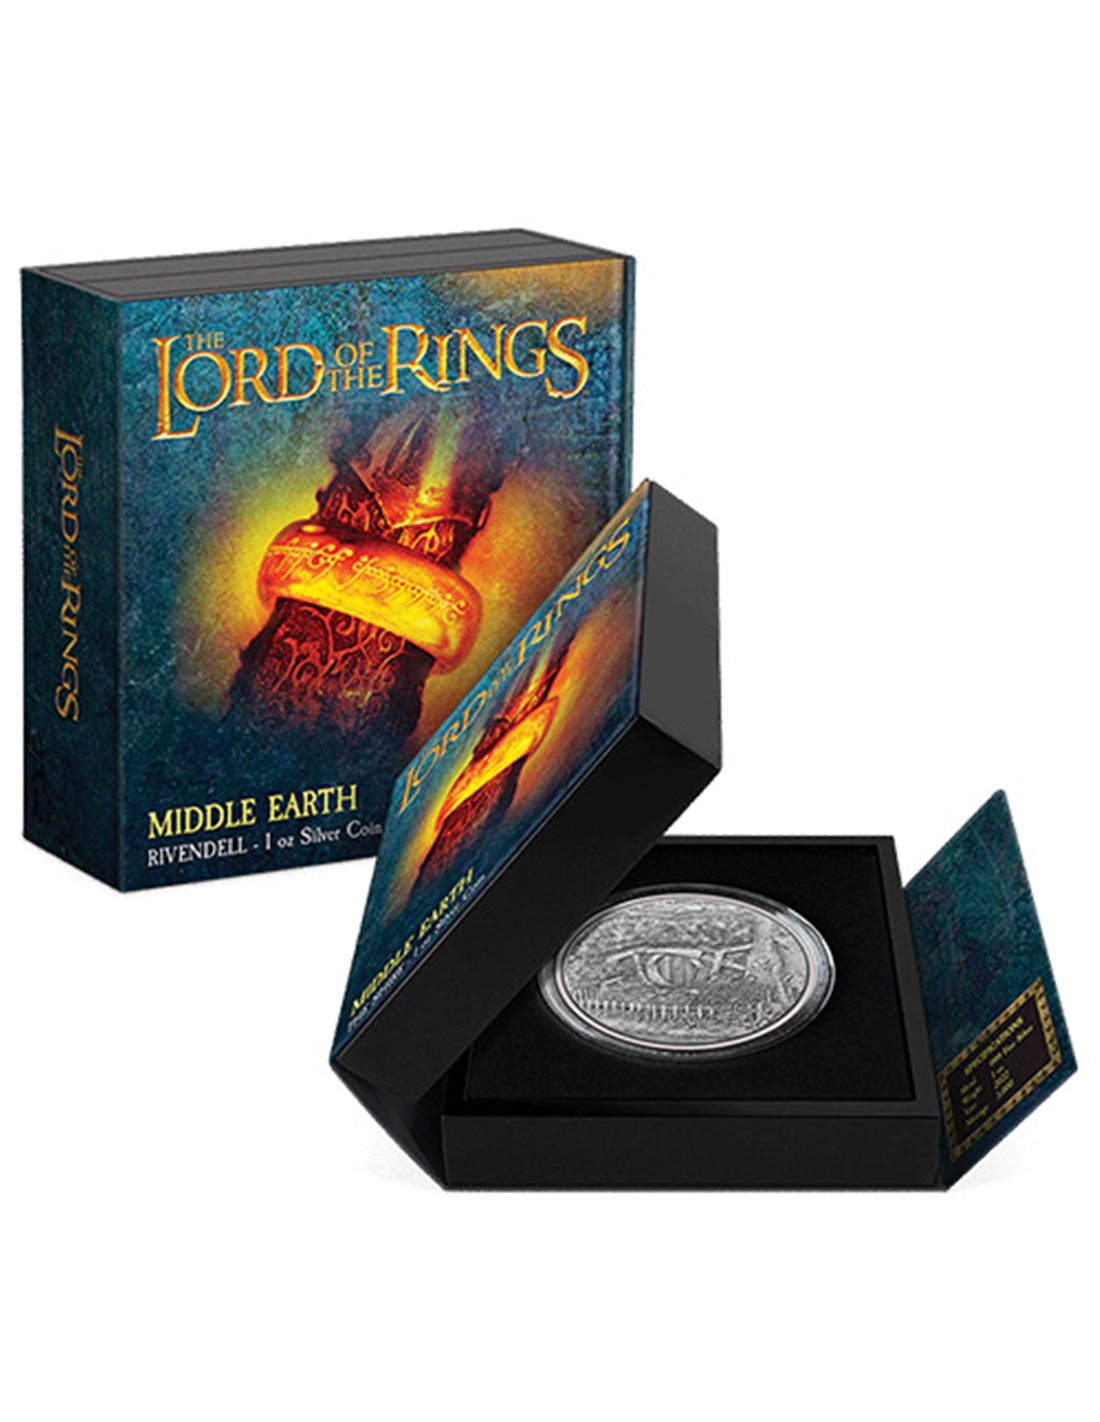 The Lord of the Rings Silver Proof Coin